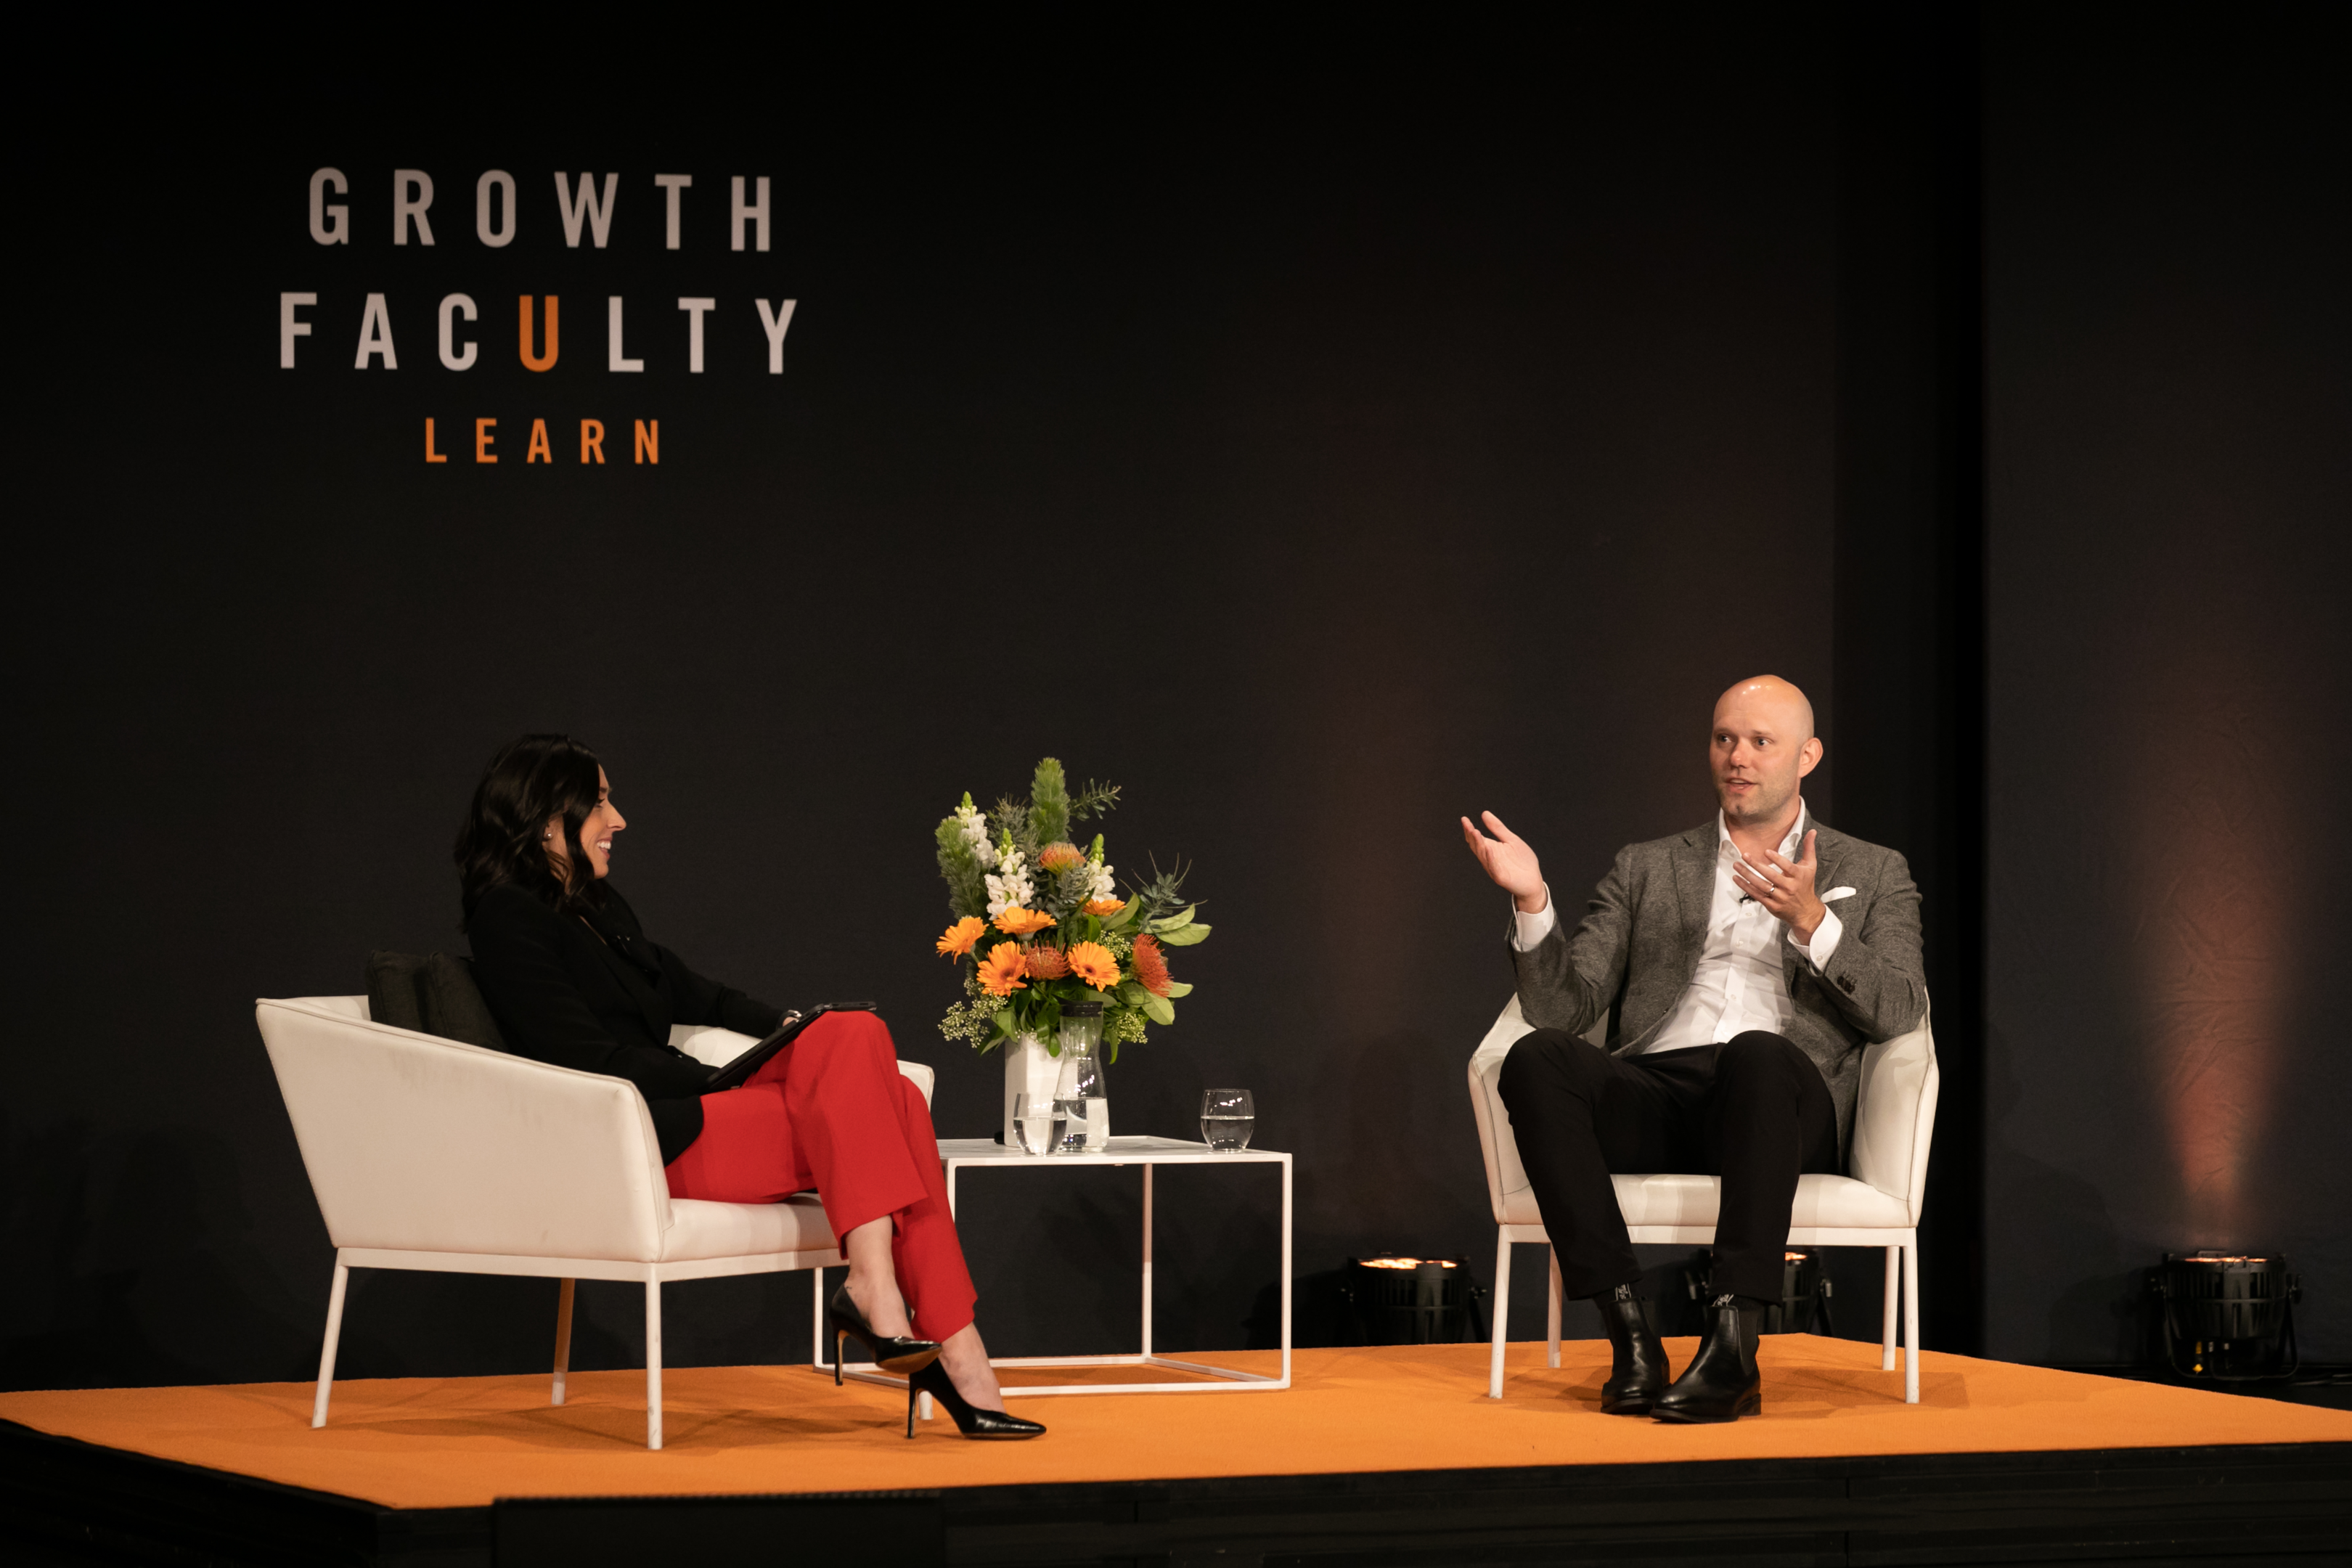 Holly Ransom interviewing James Clear at a recent Growth Faculty event.